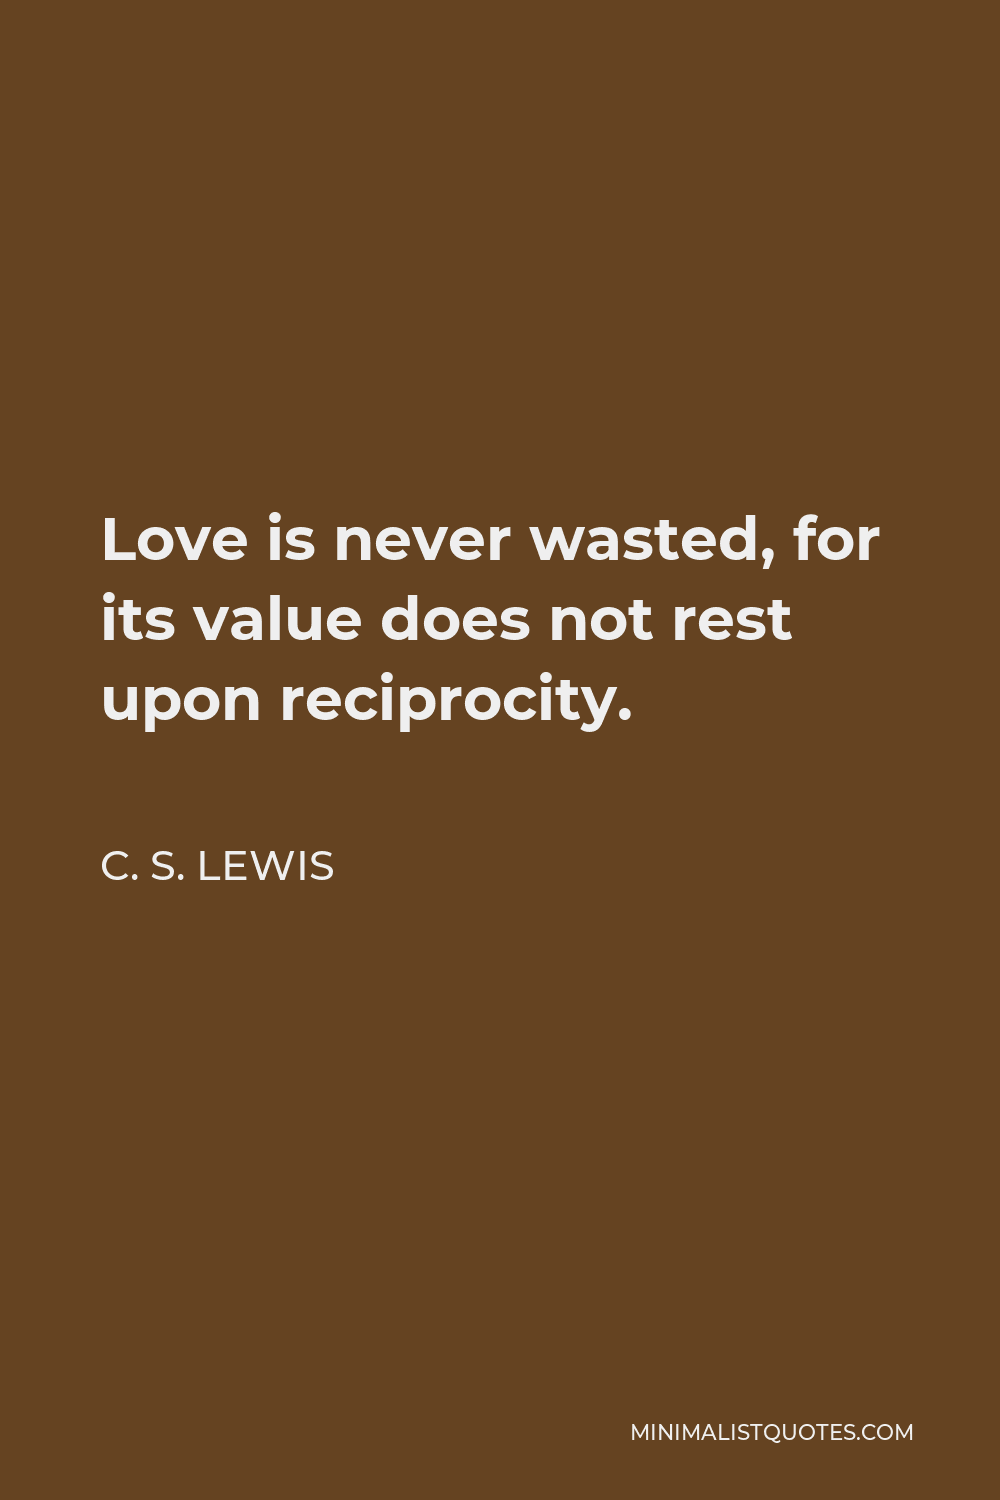 C. S. Lewis Quote - Love is never wasted, for its value does not rest upon reciprocity.